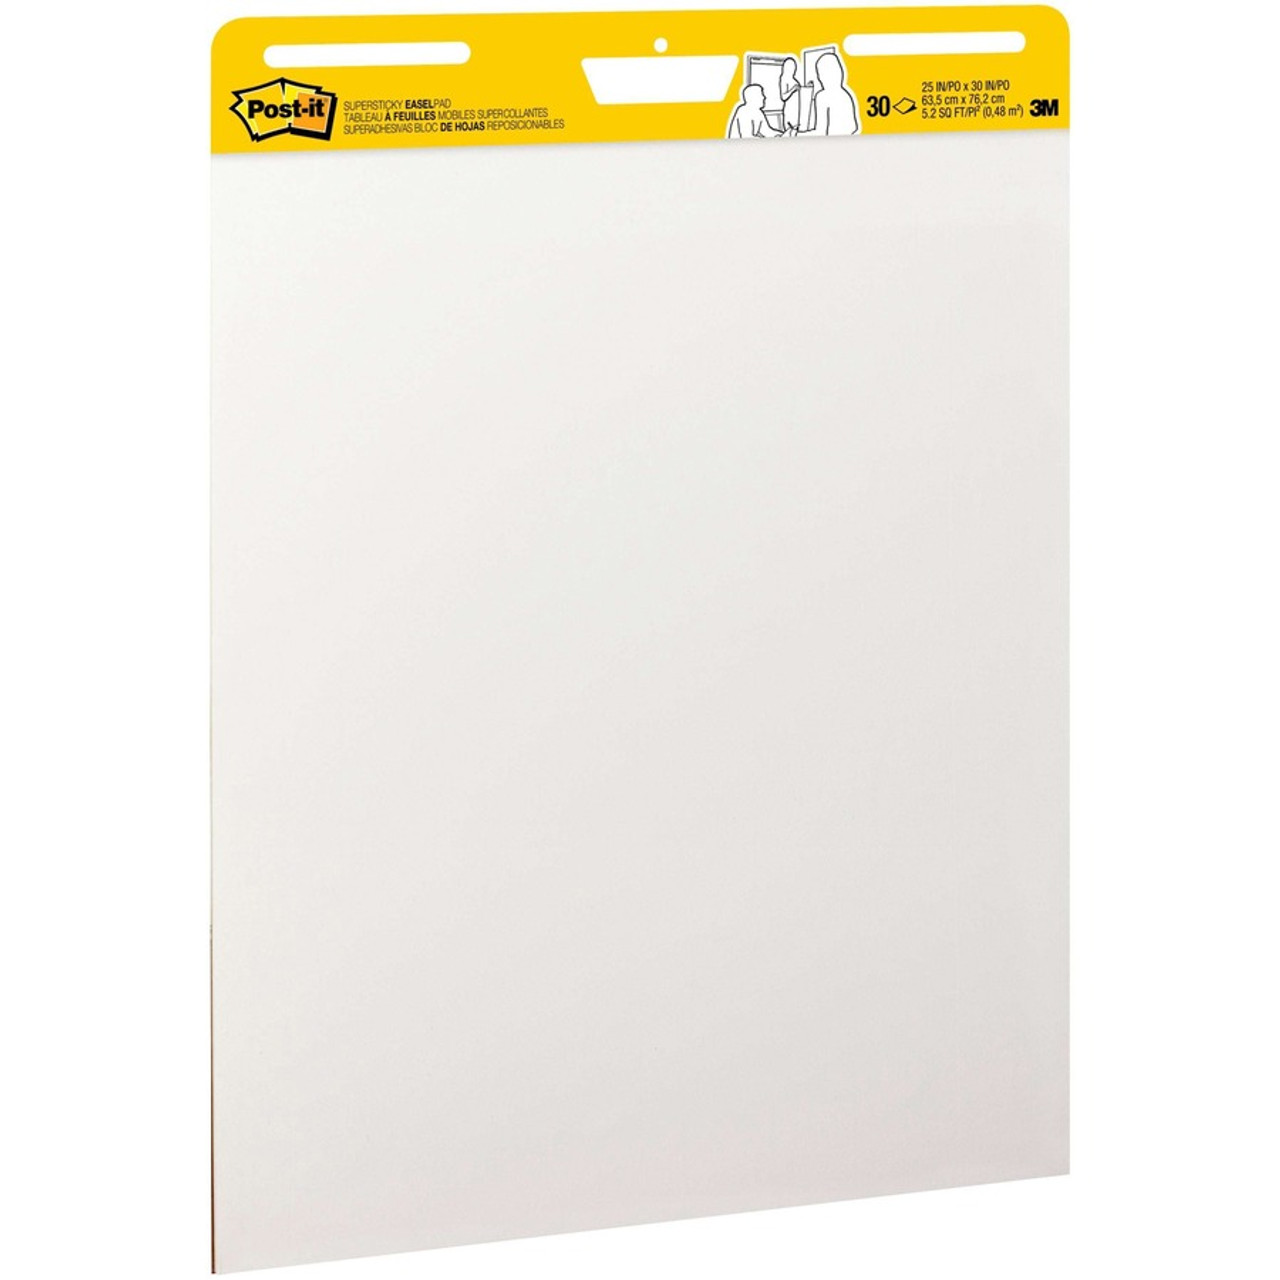 3M Post-it Easel Pad, 25 x 30, 30 Sheets, White